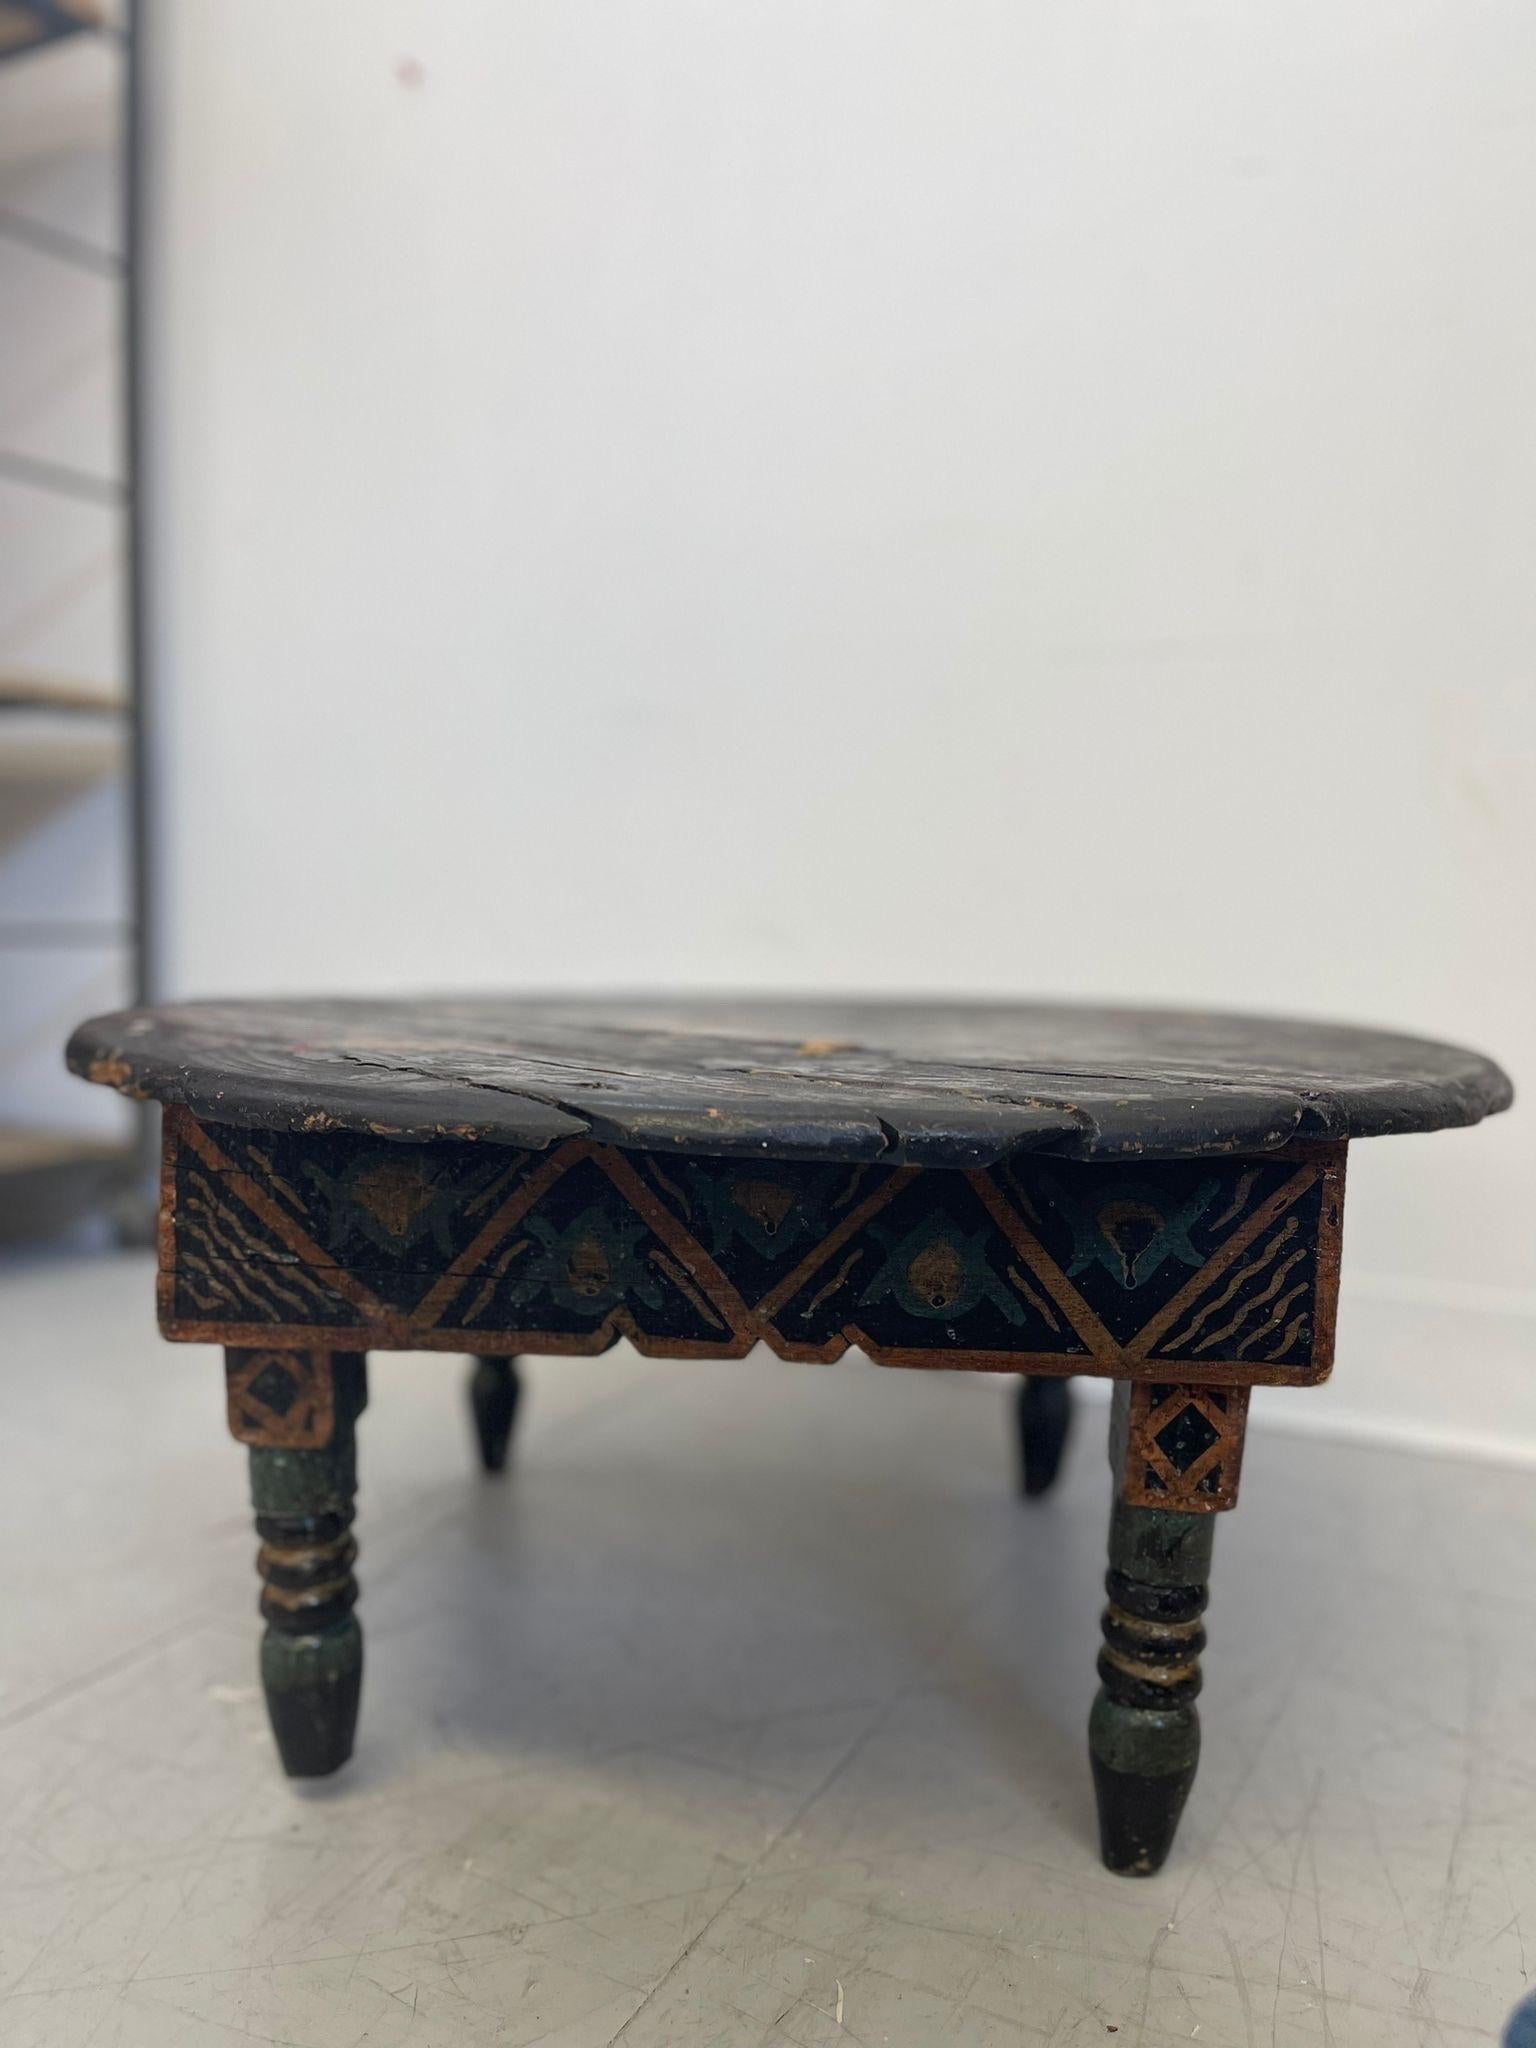 Table with Unique Illustrations of Human and Animals.
Notches on the Legs. Splitting and Vintage Condition Consistent with Age.

Dimensions. 23 Diameter ; 11 H